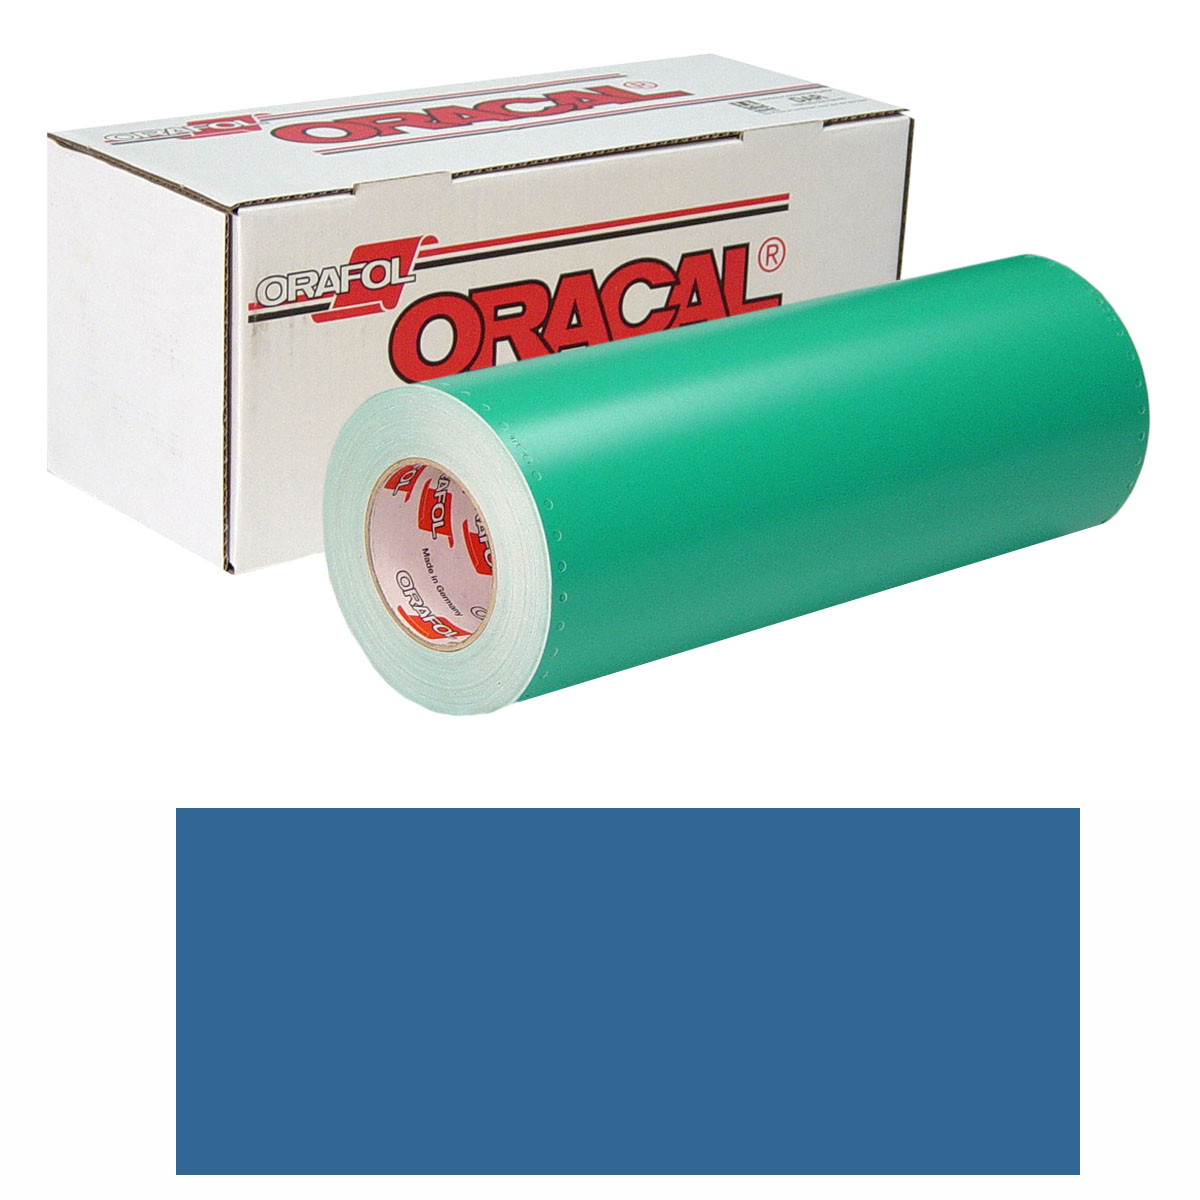 ORACAL 8500 30in X 10yd 066 Turquois Blue